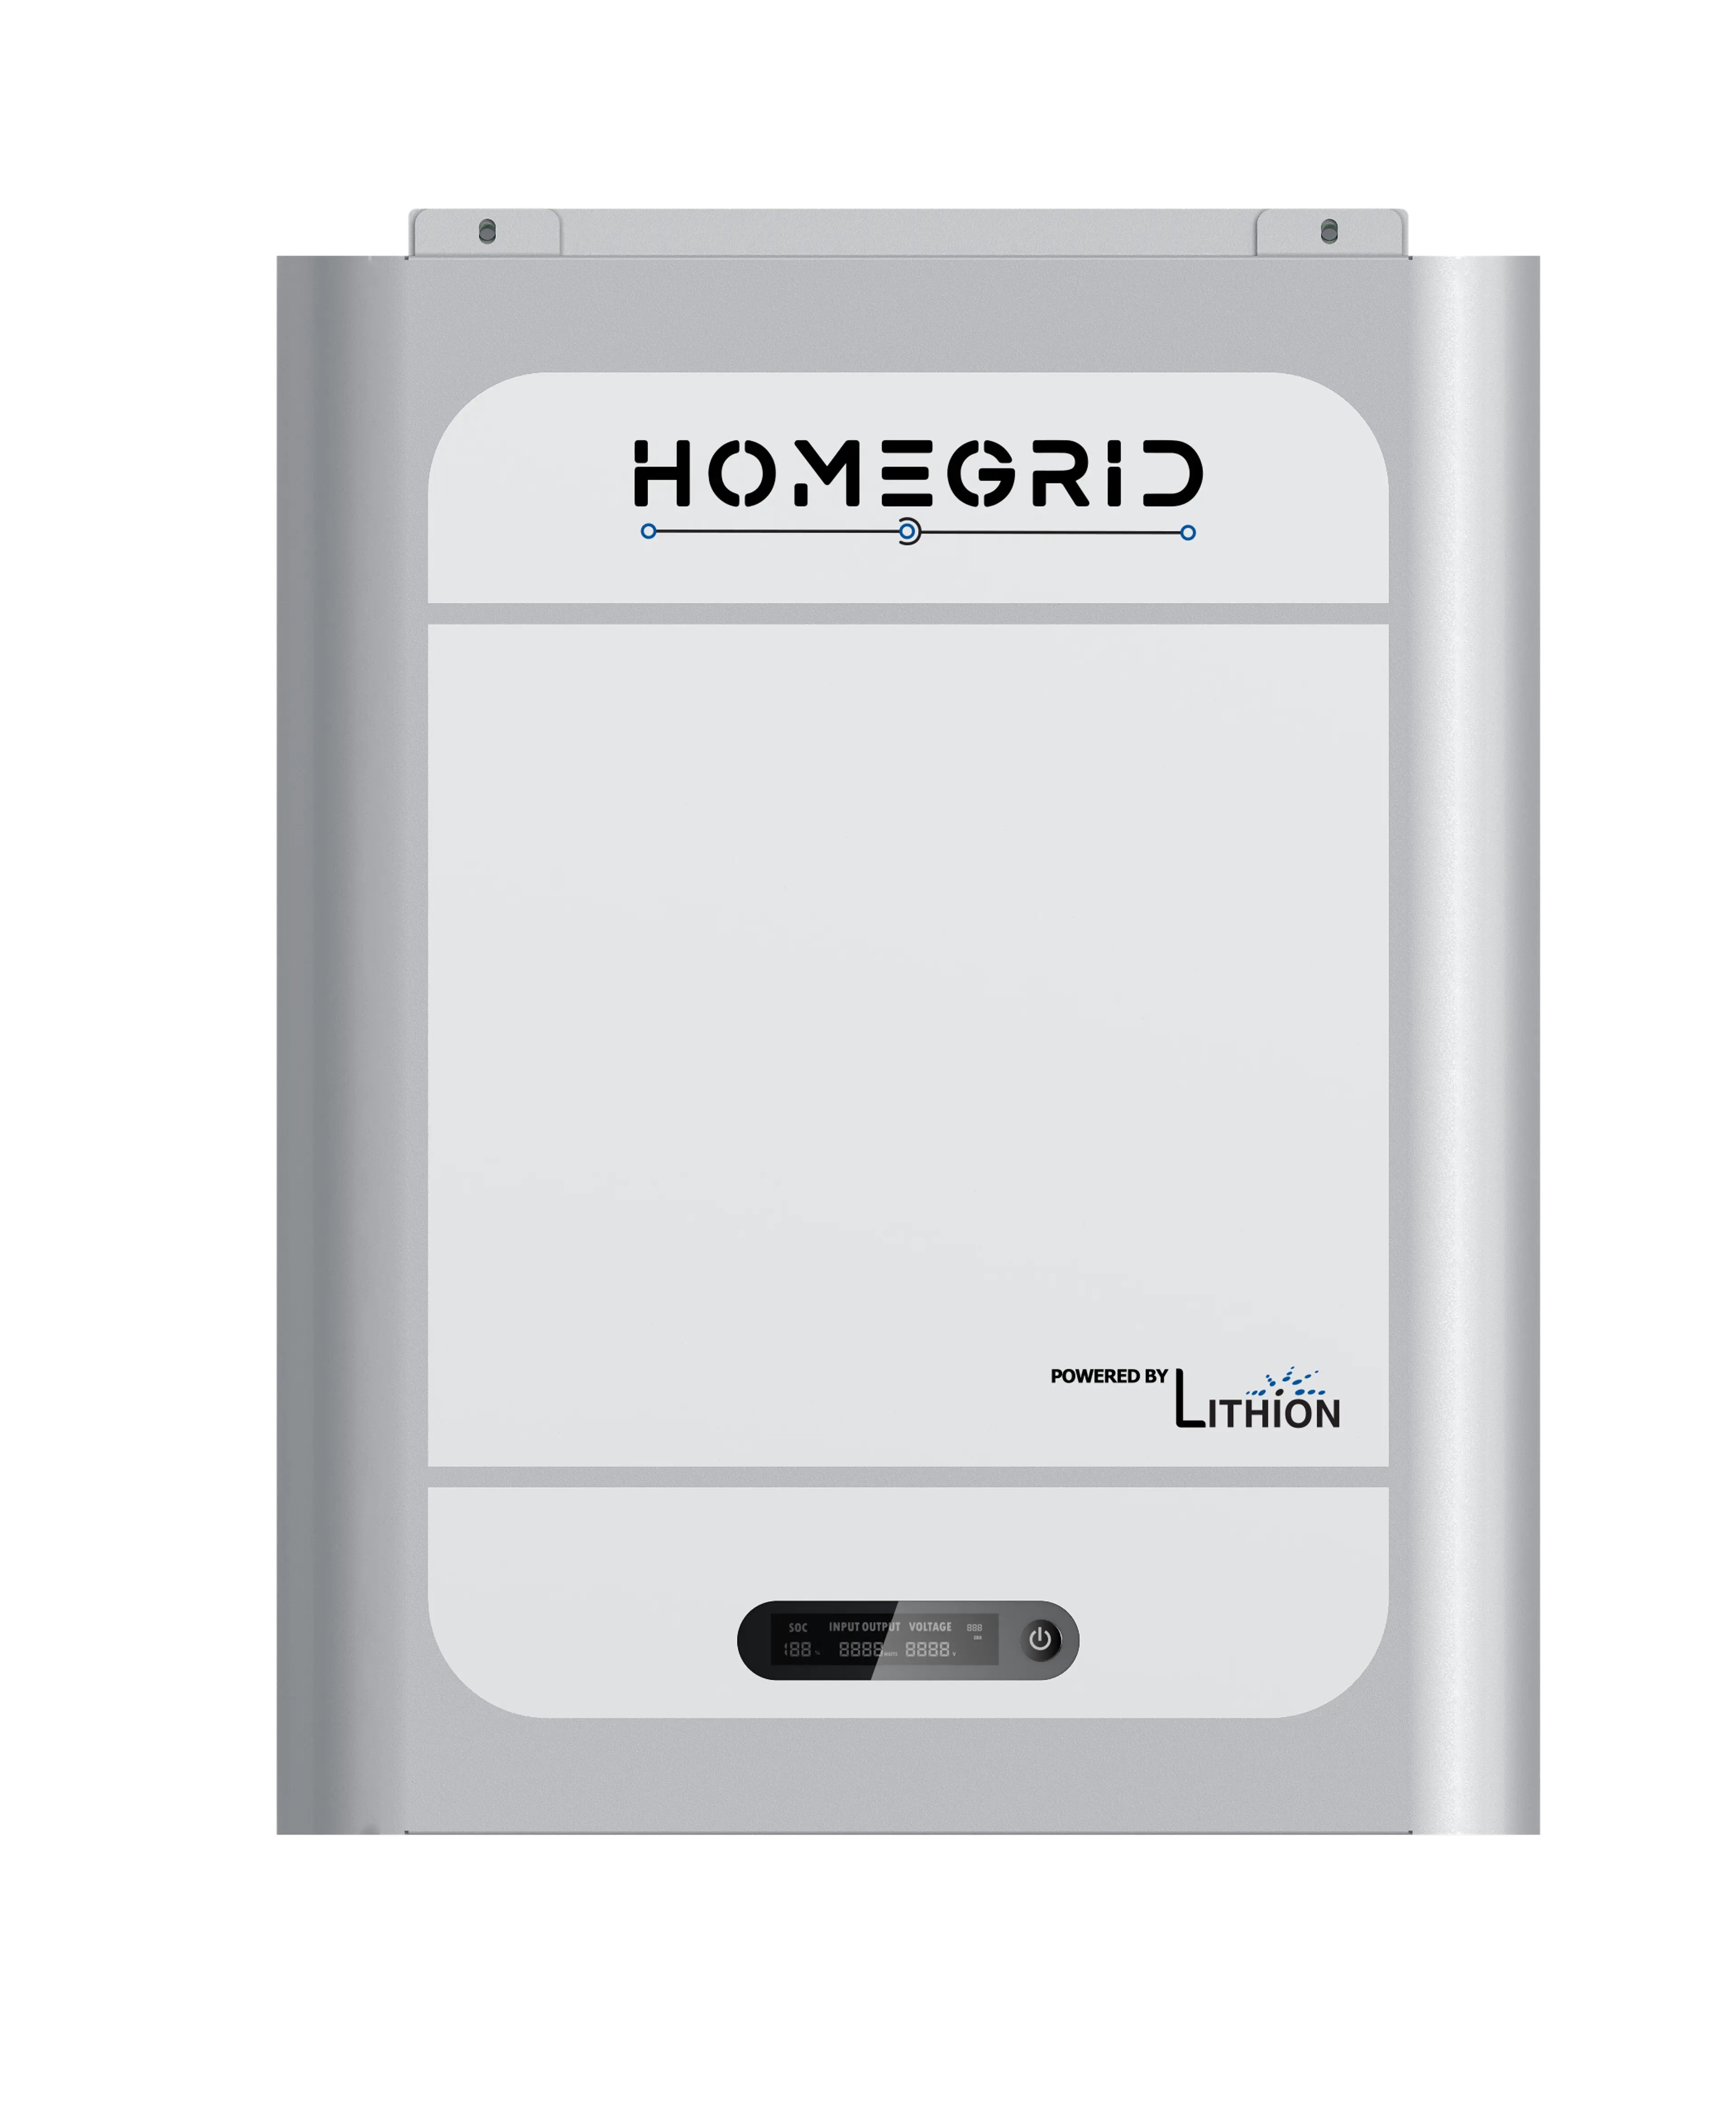  Home Grid Compact 